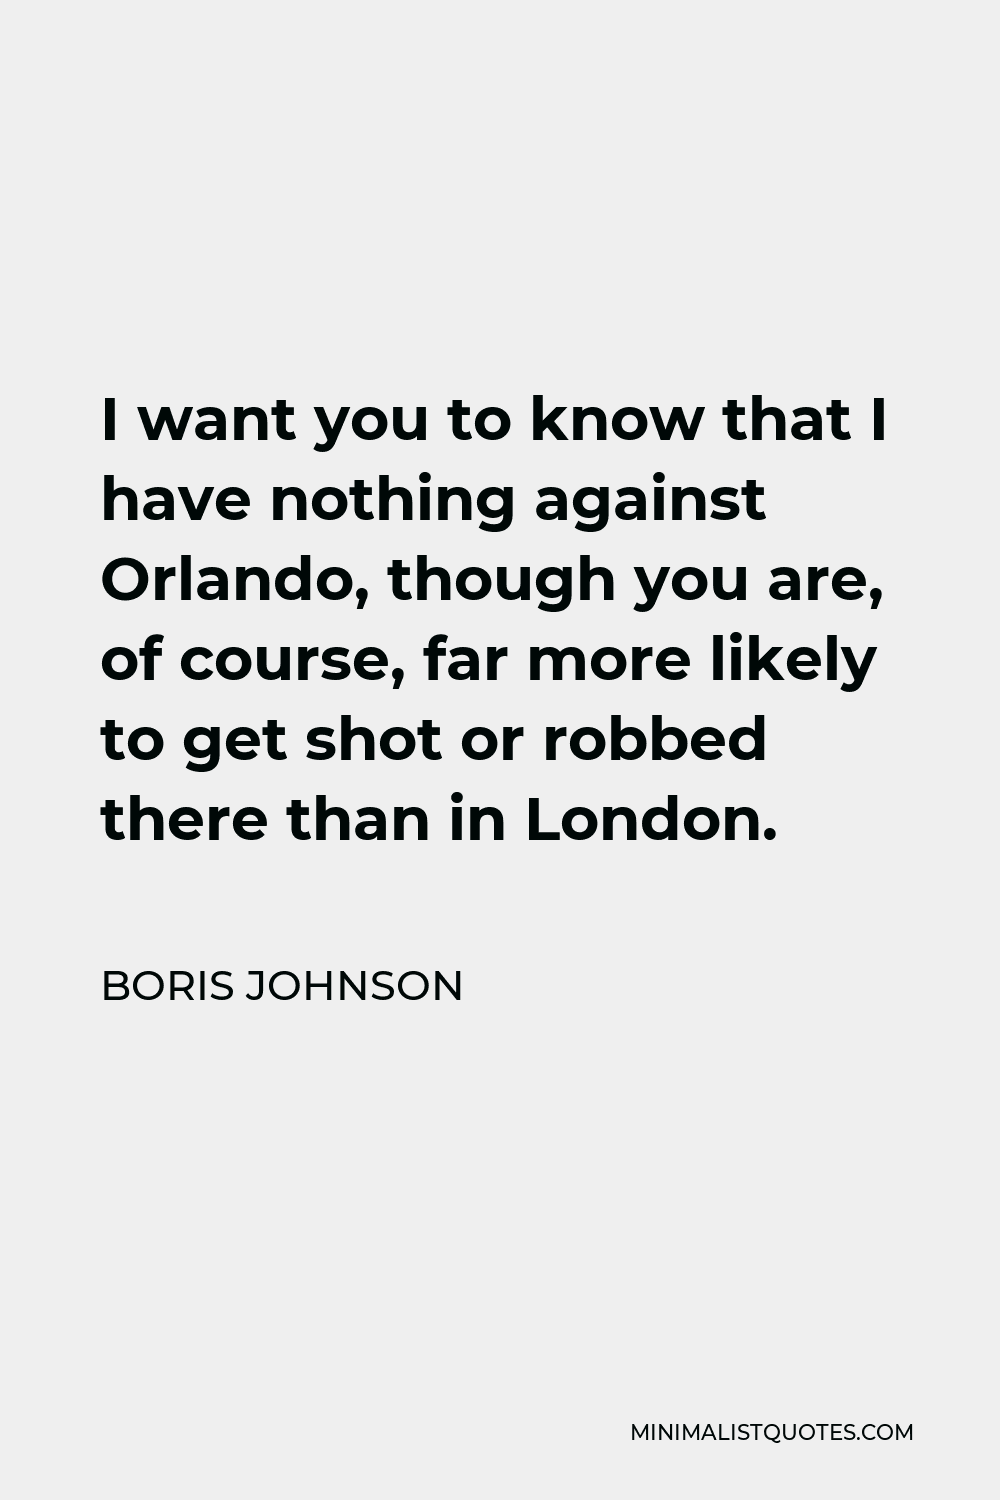 Boris Johnson Quote - I want you to know that I have nothing against Orlando, though you are, of course, far more likely to get shot or robbed there than in London.